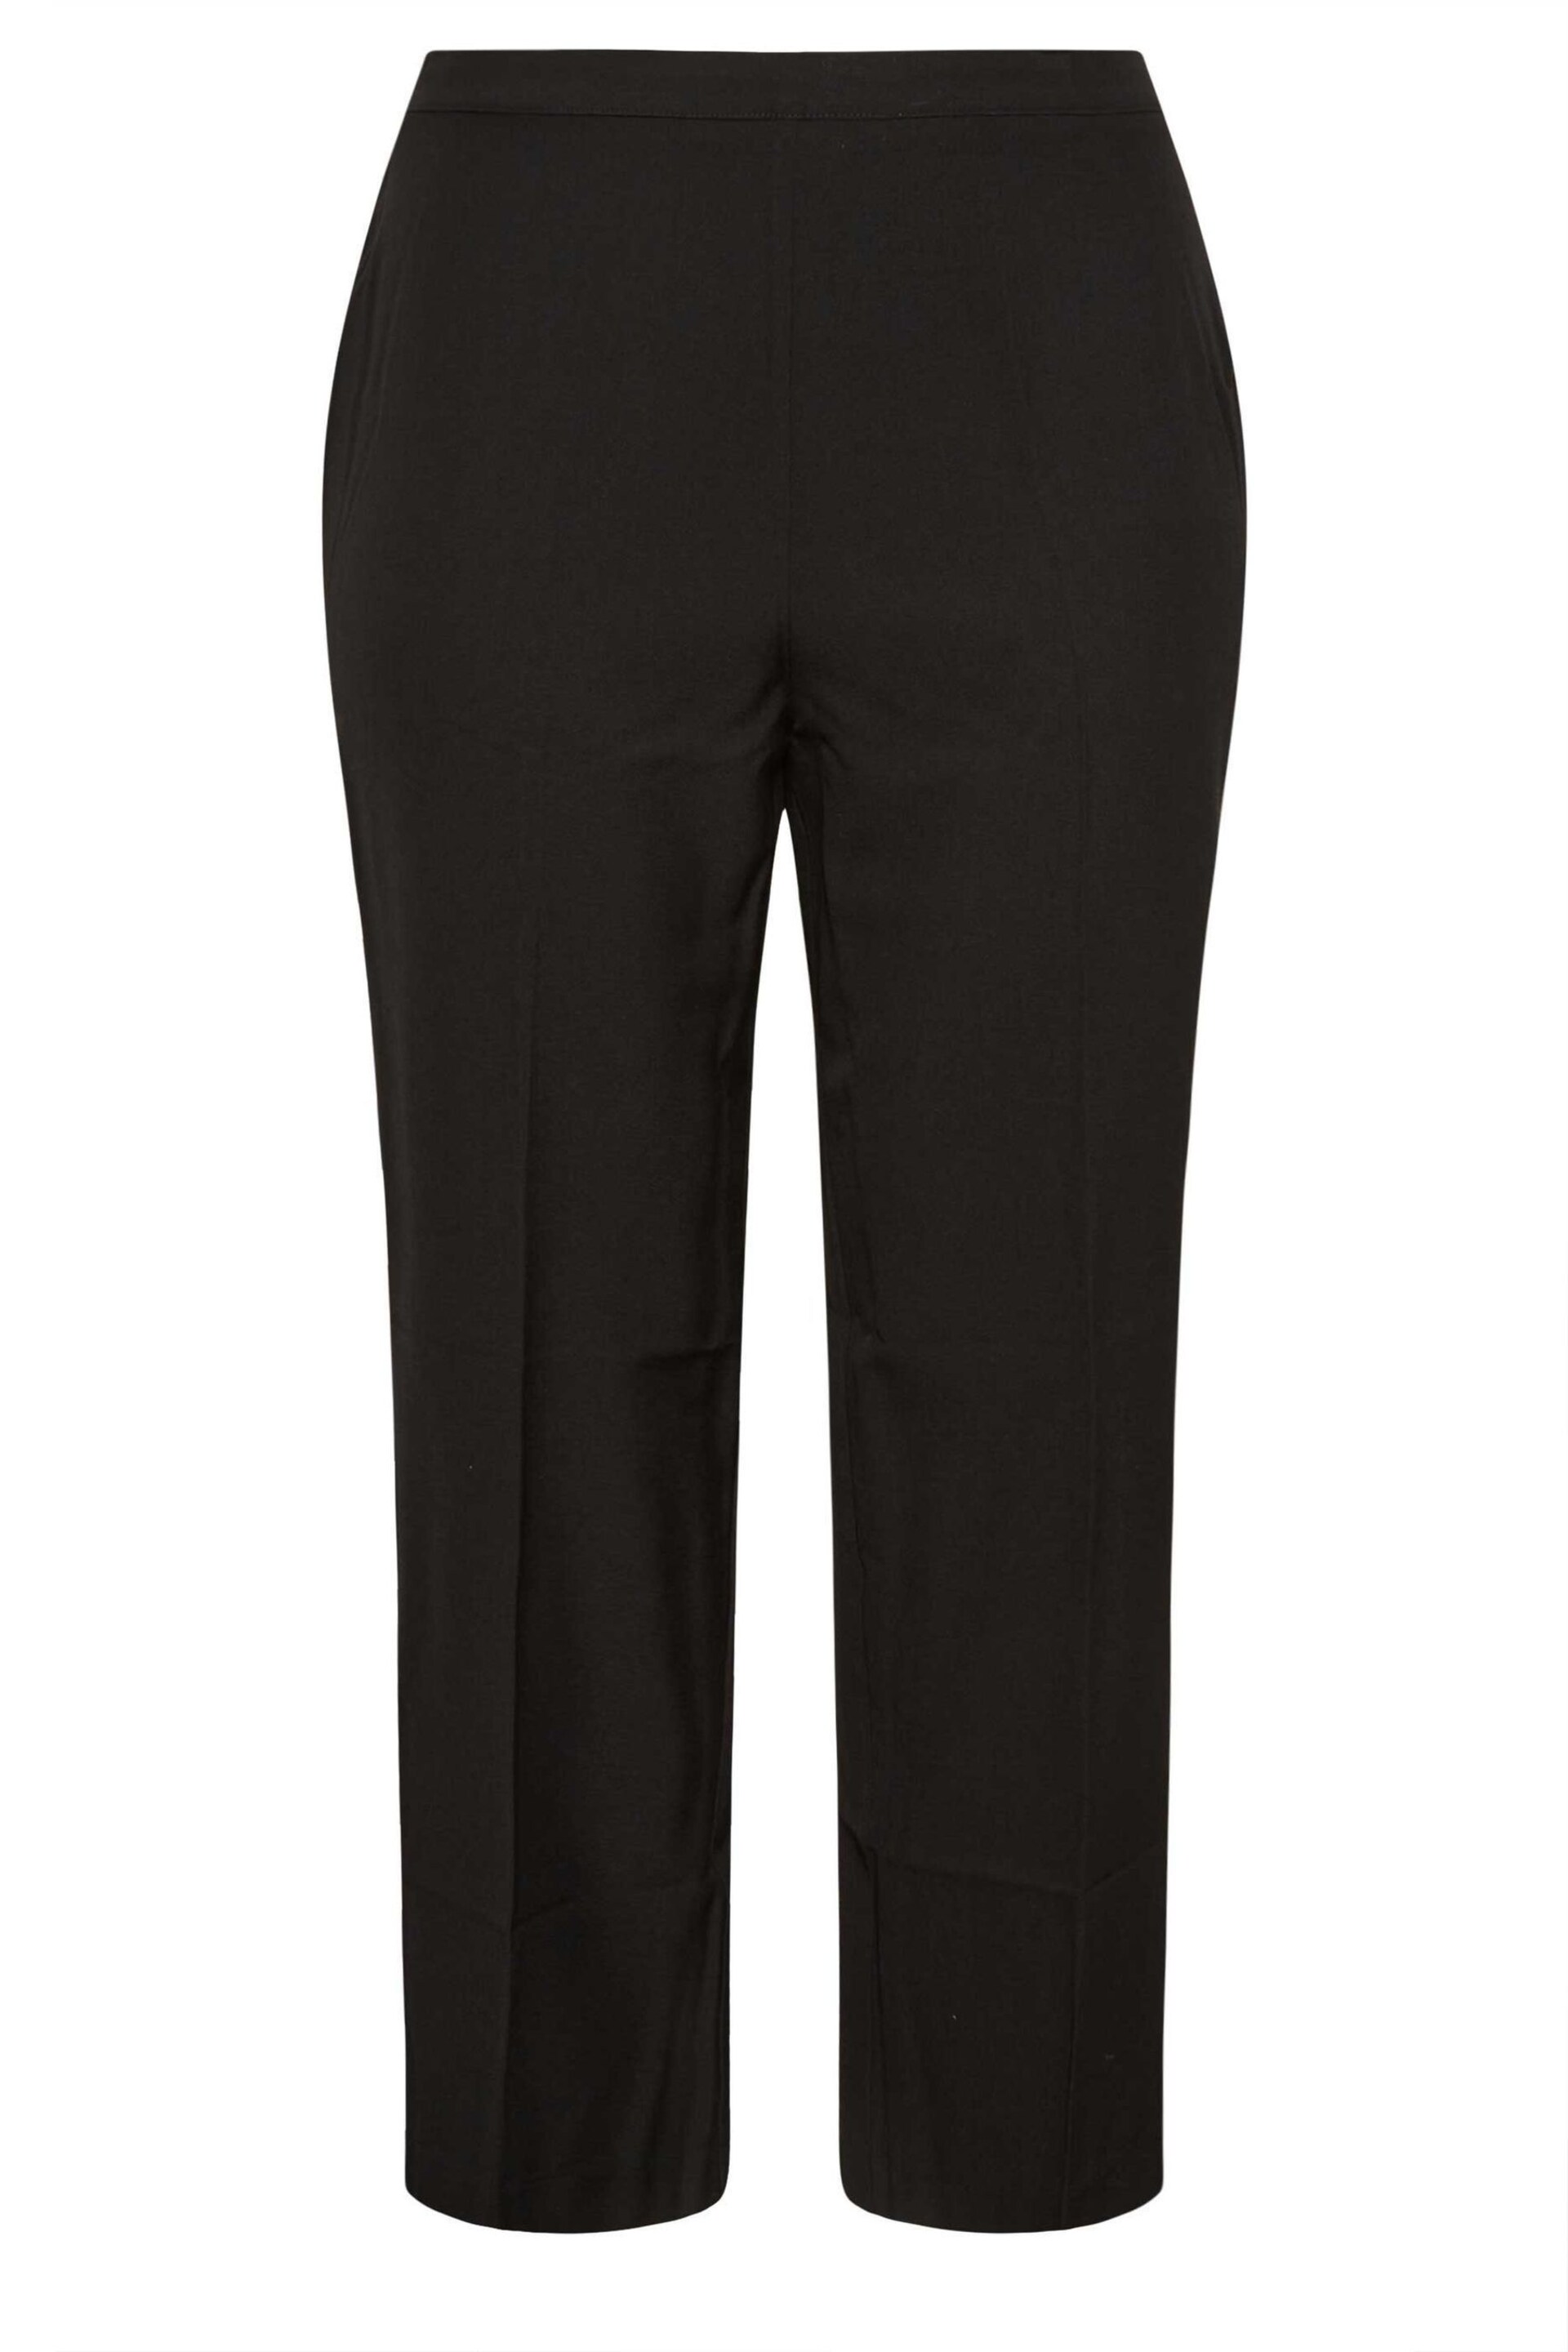 Yours Curve Black Elasticated Stretch Straight Leg Trousers - Image 5 of 6